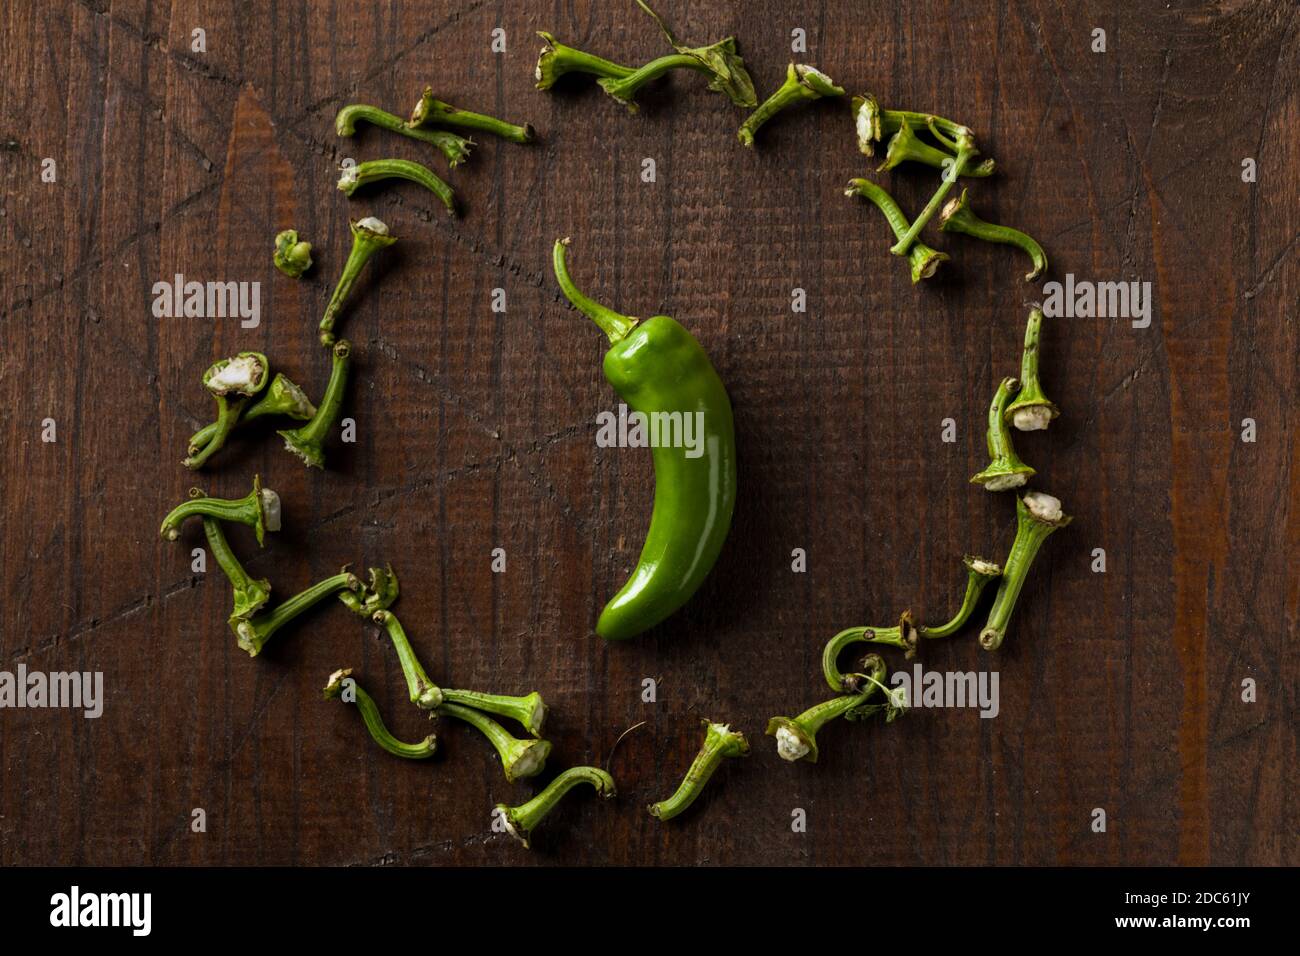 Green Friggitello Chili Pepper with Scattareed Petioles on Wooden Surface Stock Photo